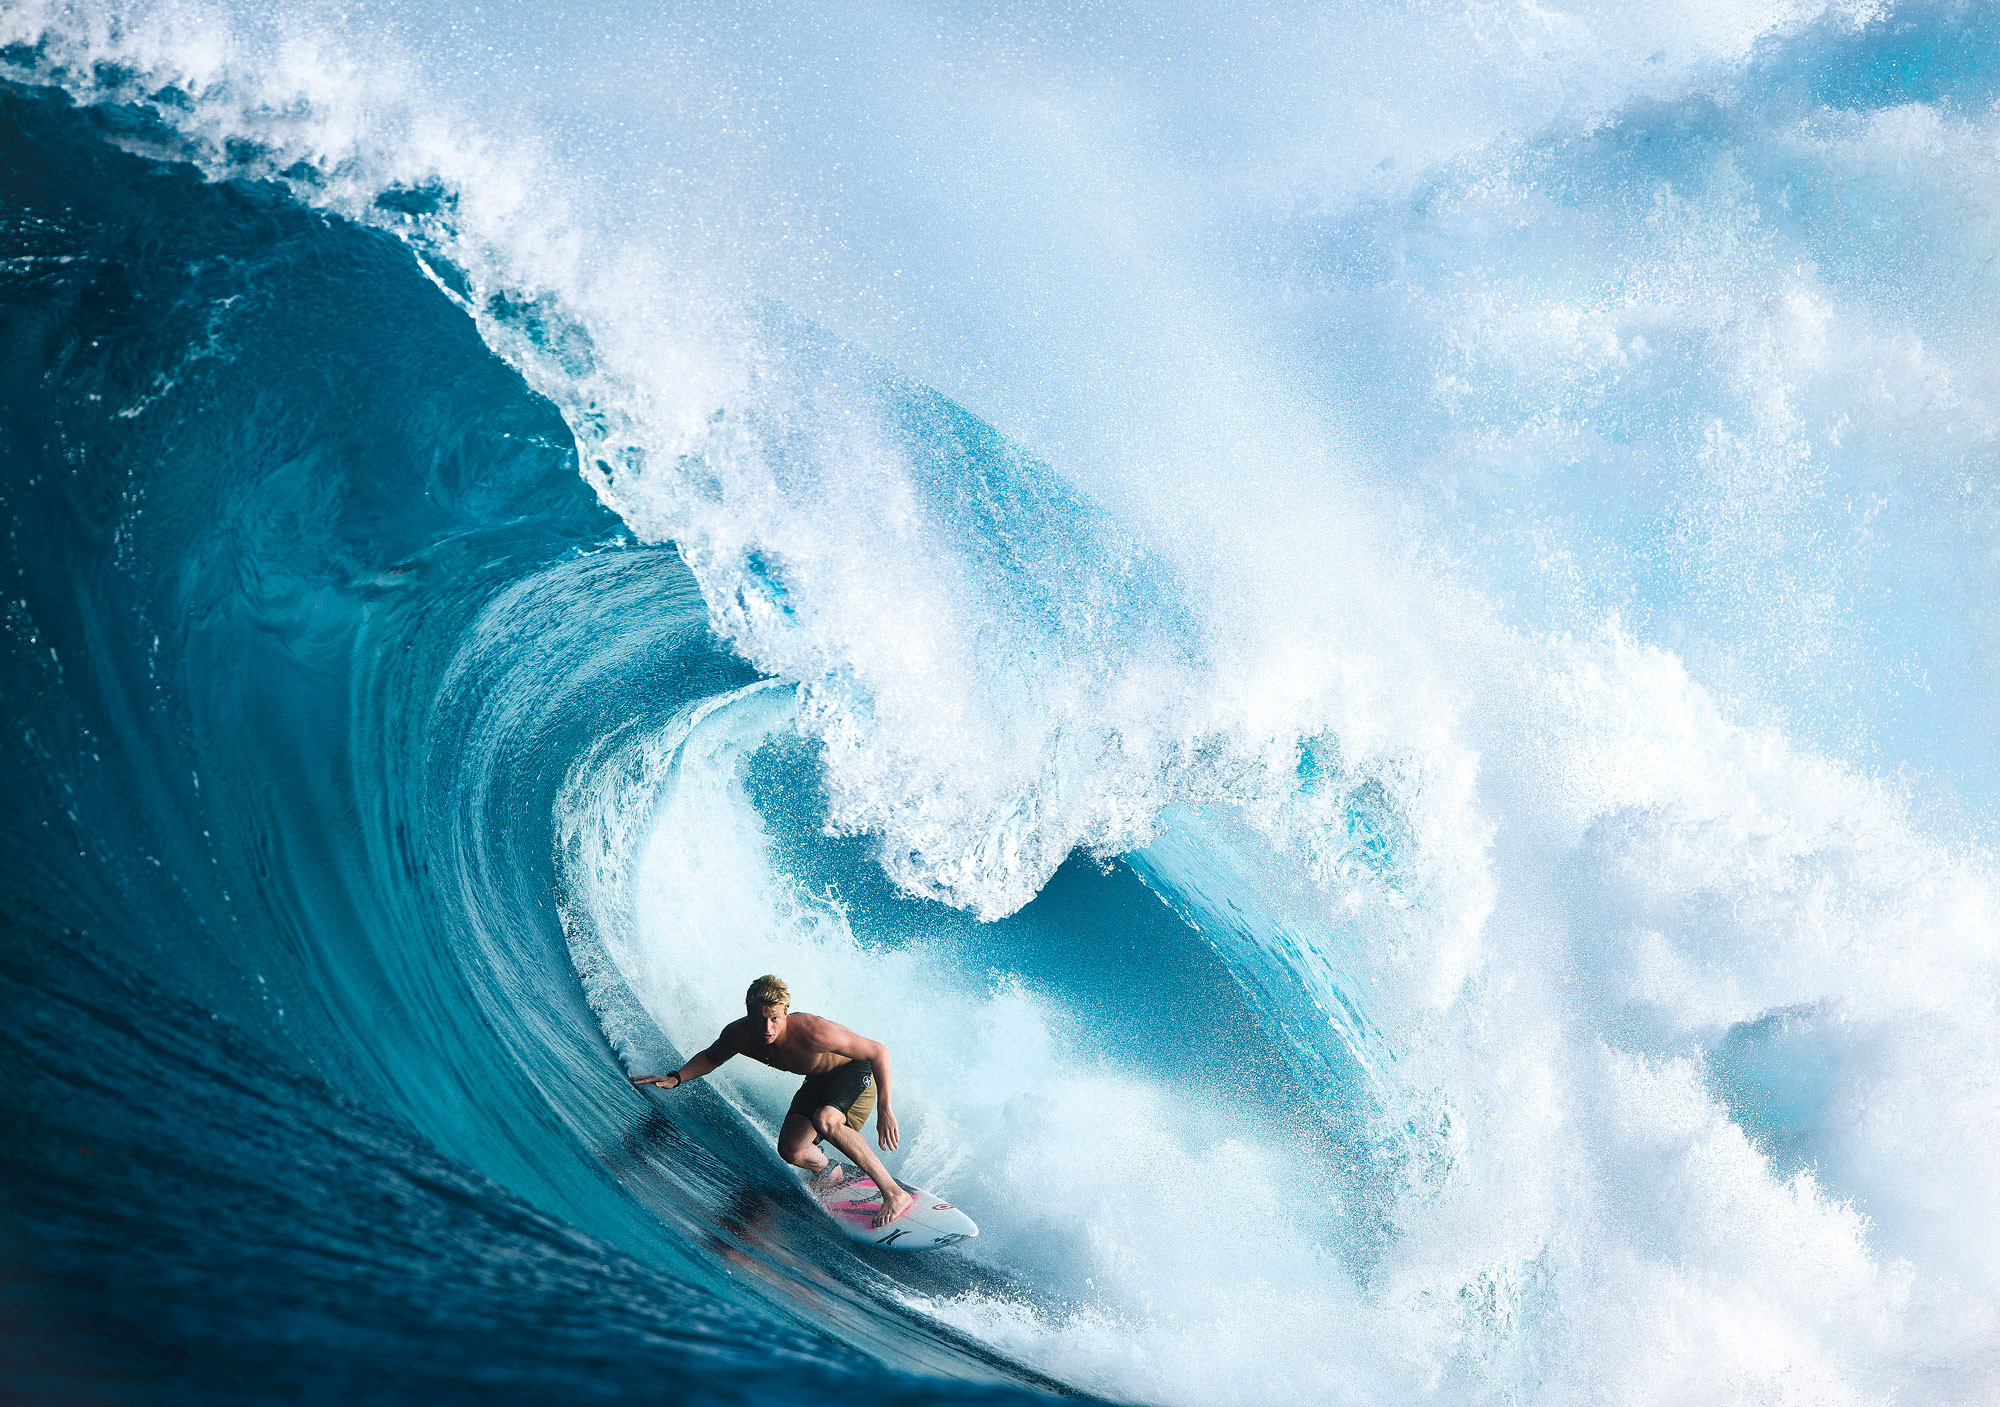 2000x1407 1920x1080 surfing wallpapers hd